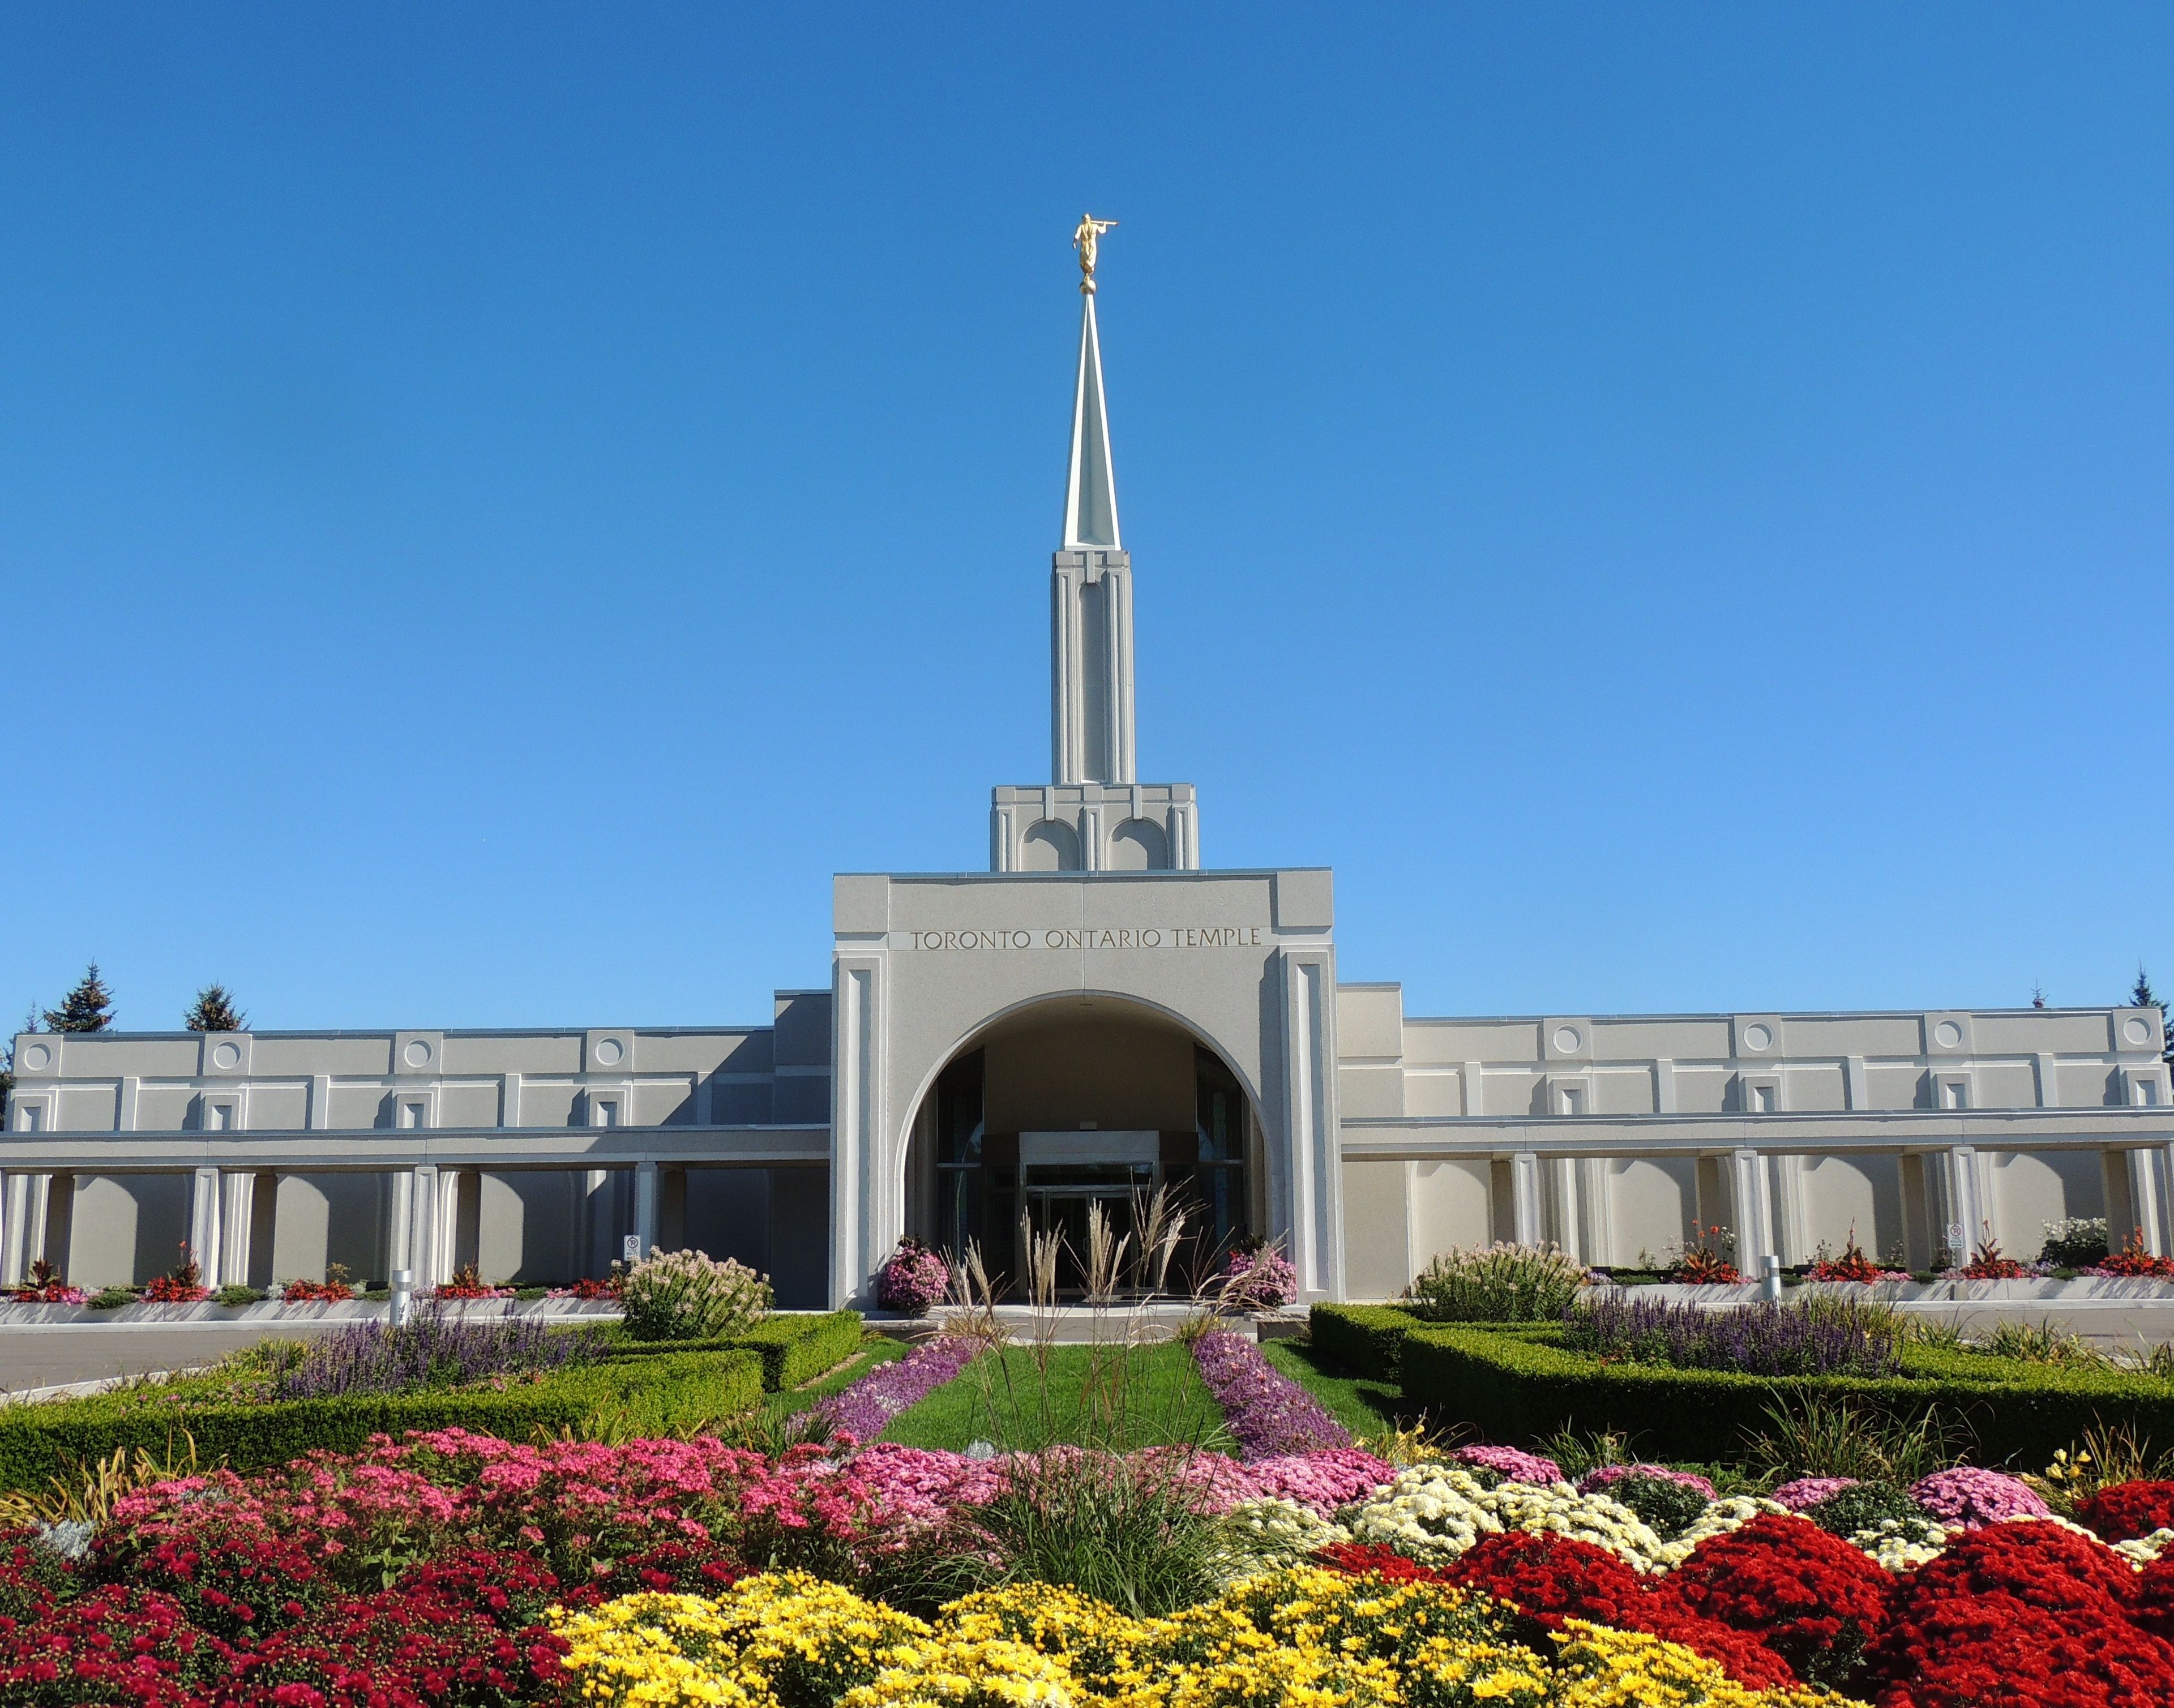 The Toronto Ontario Temple entrance, including scenery.